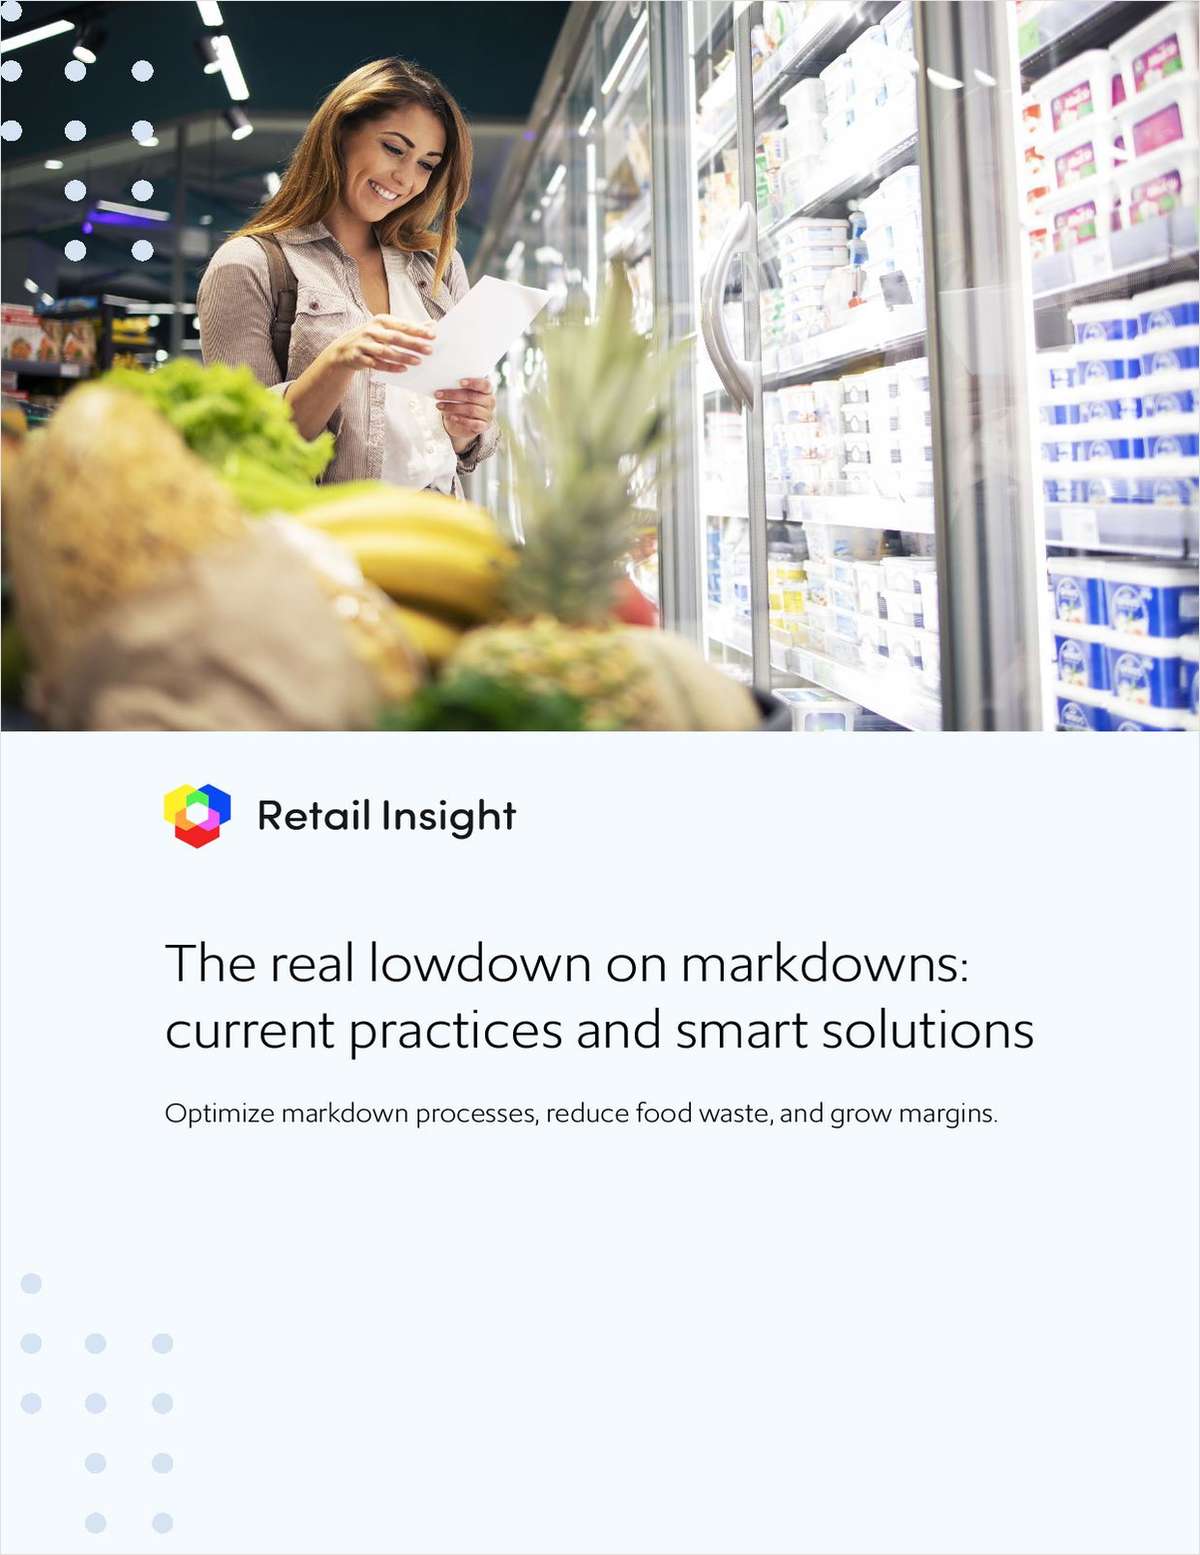 The real lowdown on markdowns: current practices and smart solutions